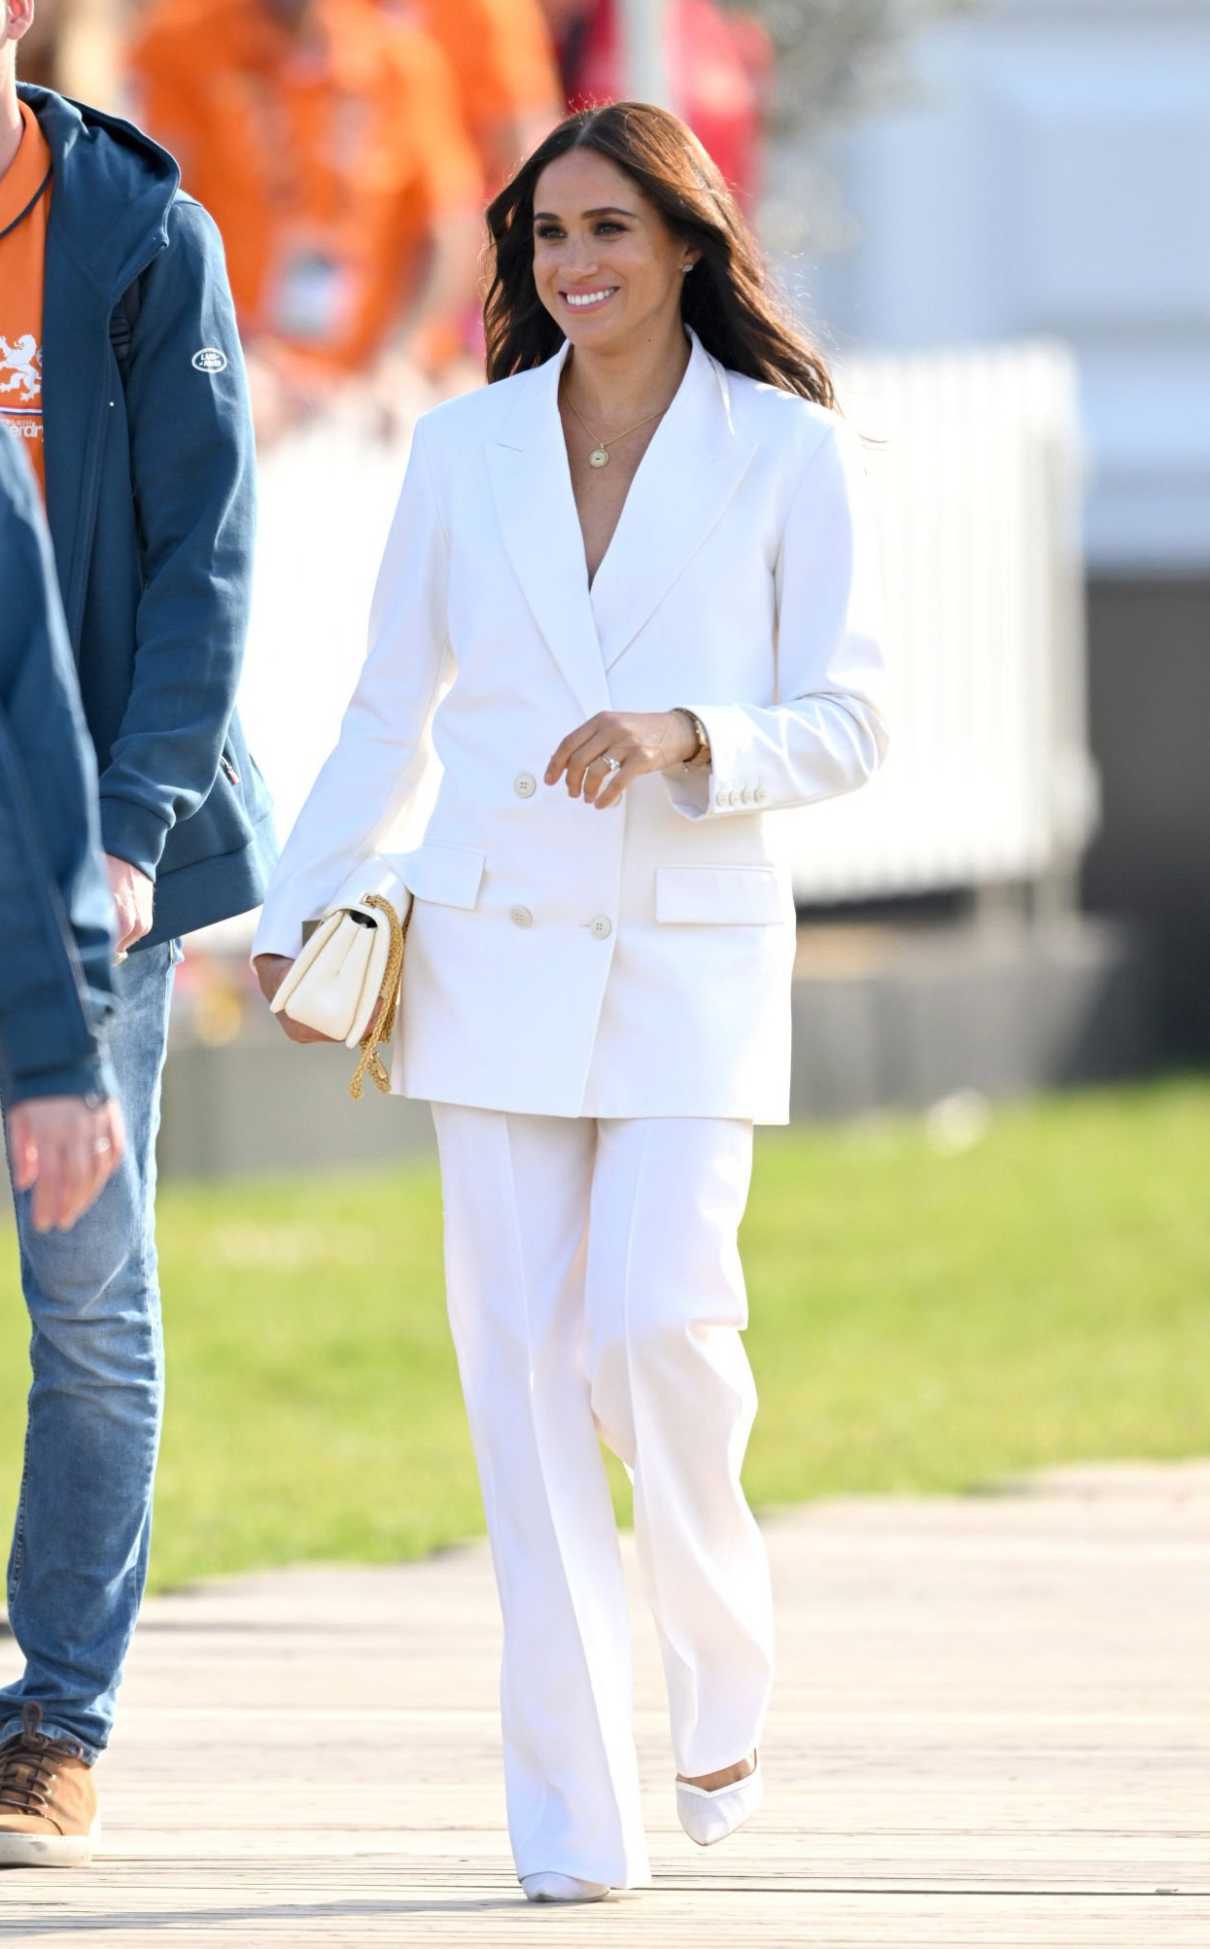 Meghan Markle in a White Pantsuit